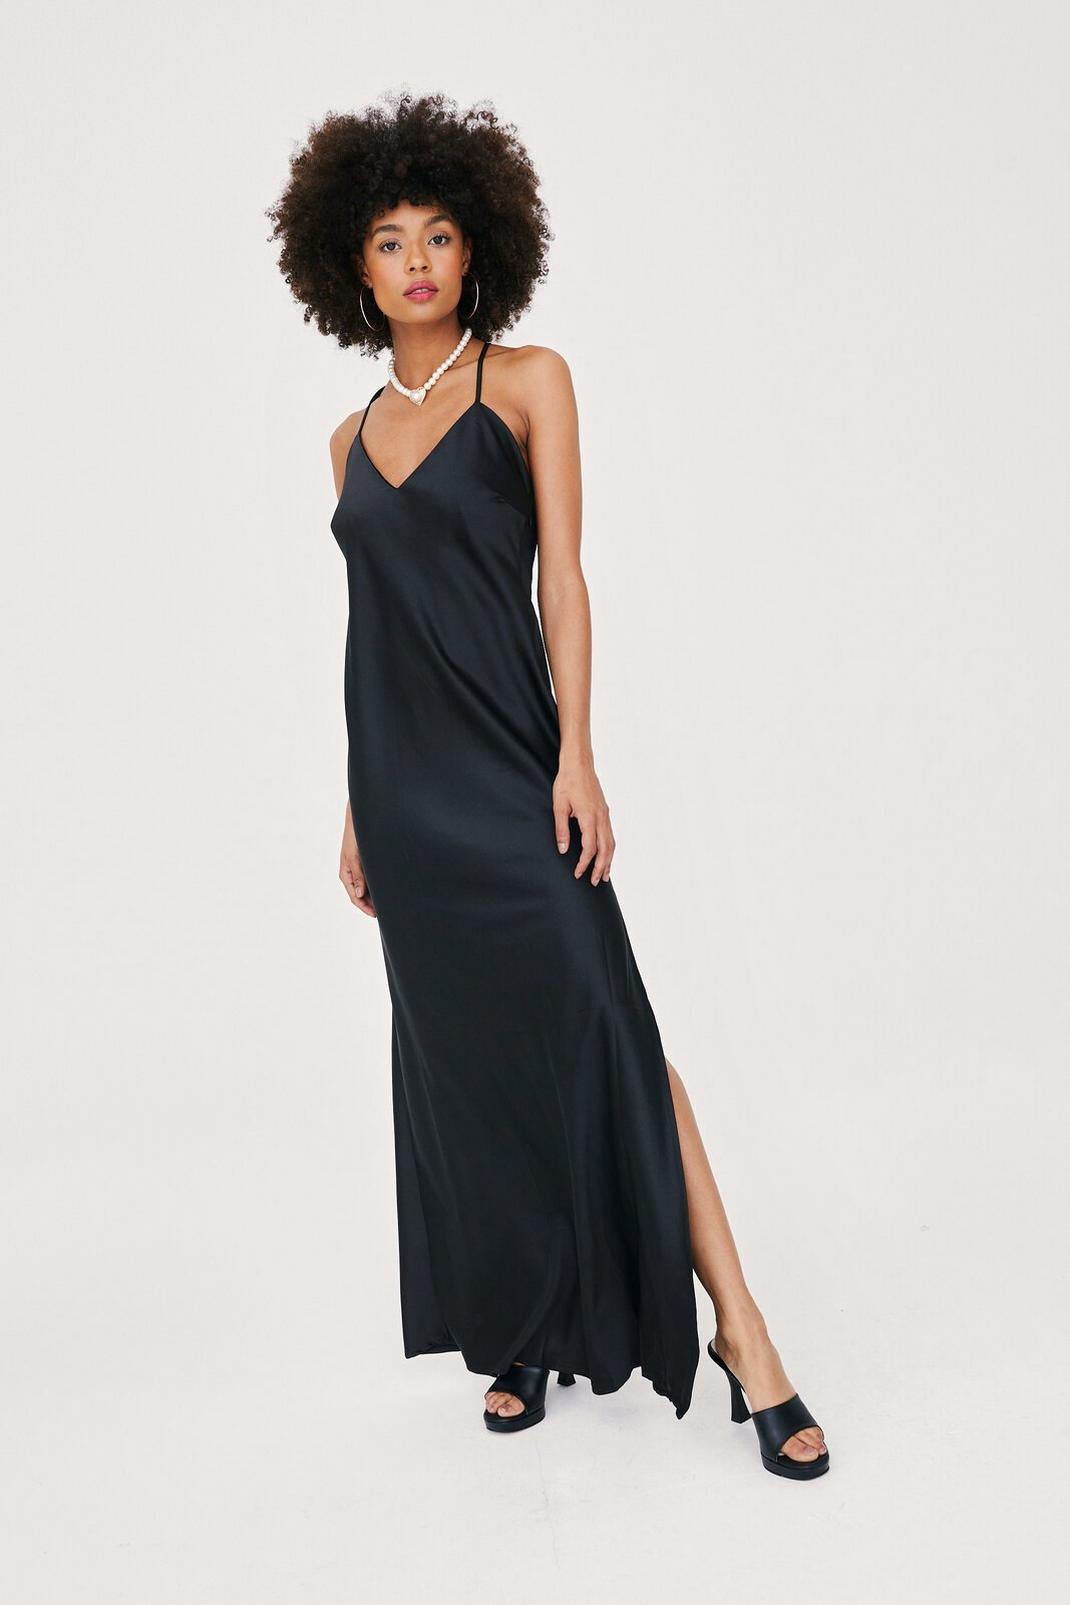 Strappy Back Sexy Summer Maxi Dress